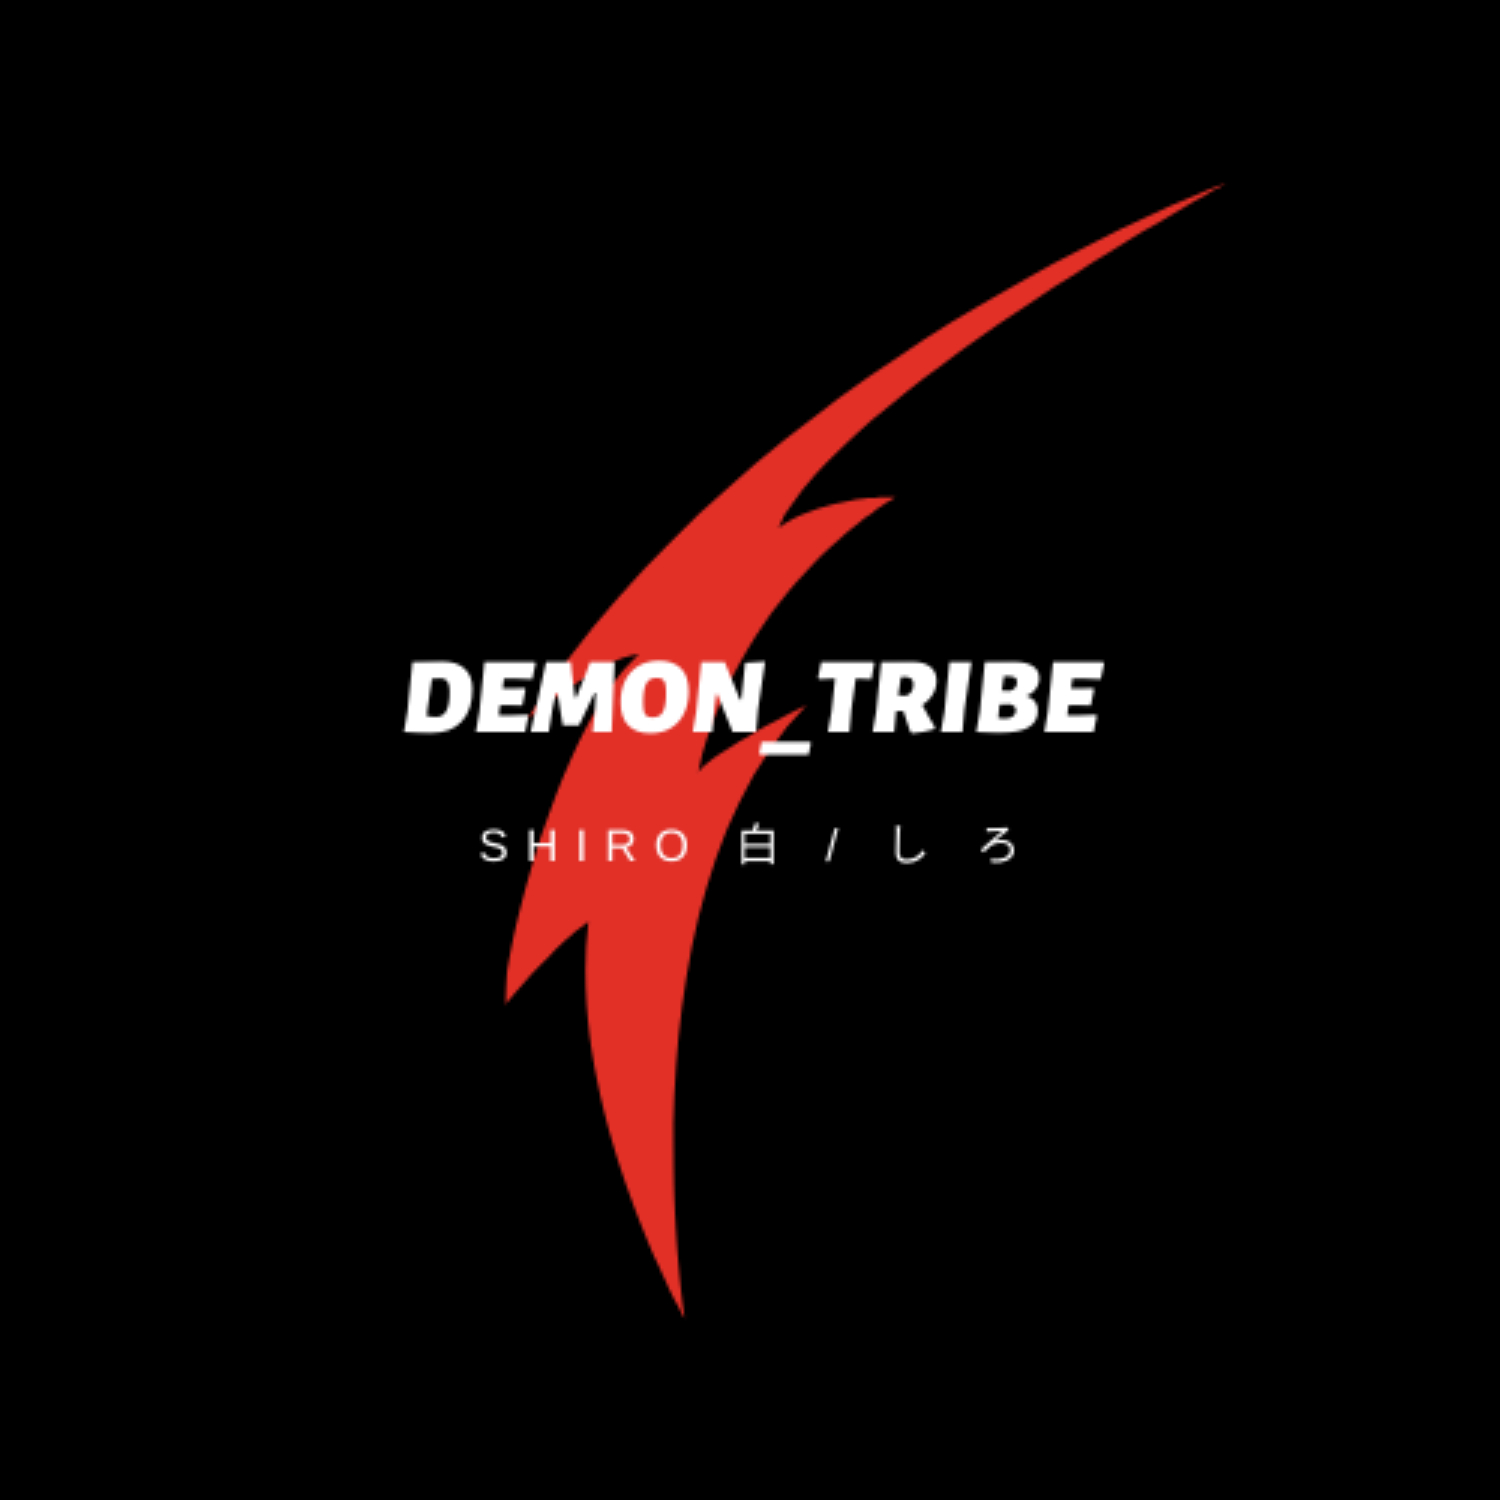 Demon_Tribe's Profile Picture on PvPRP